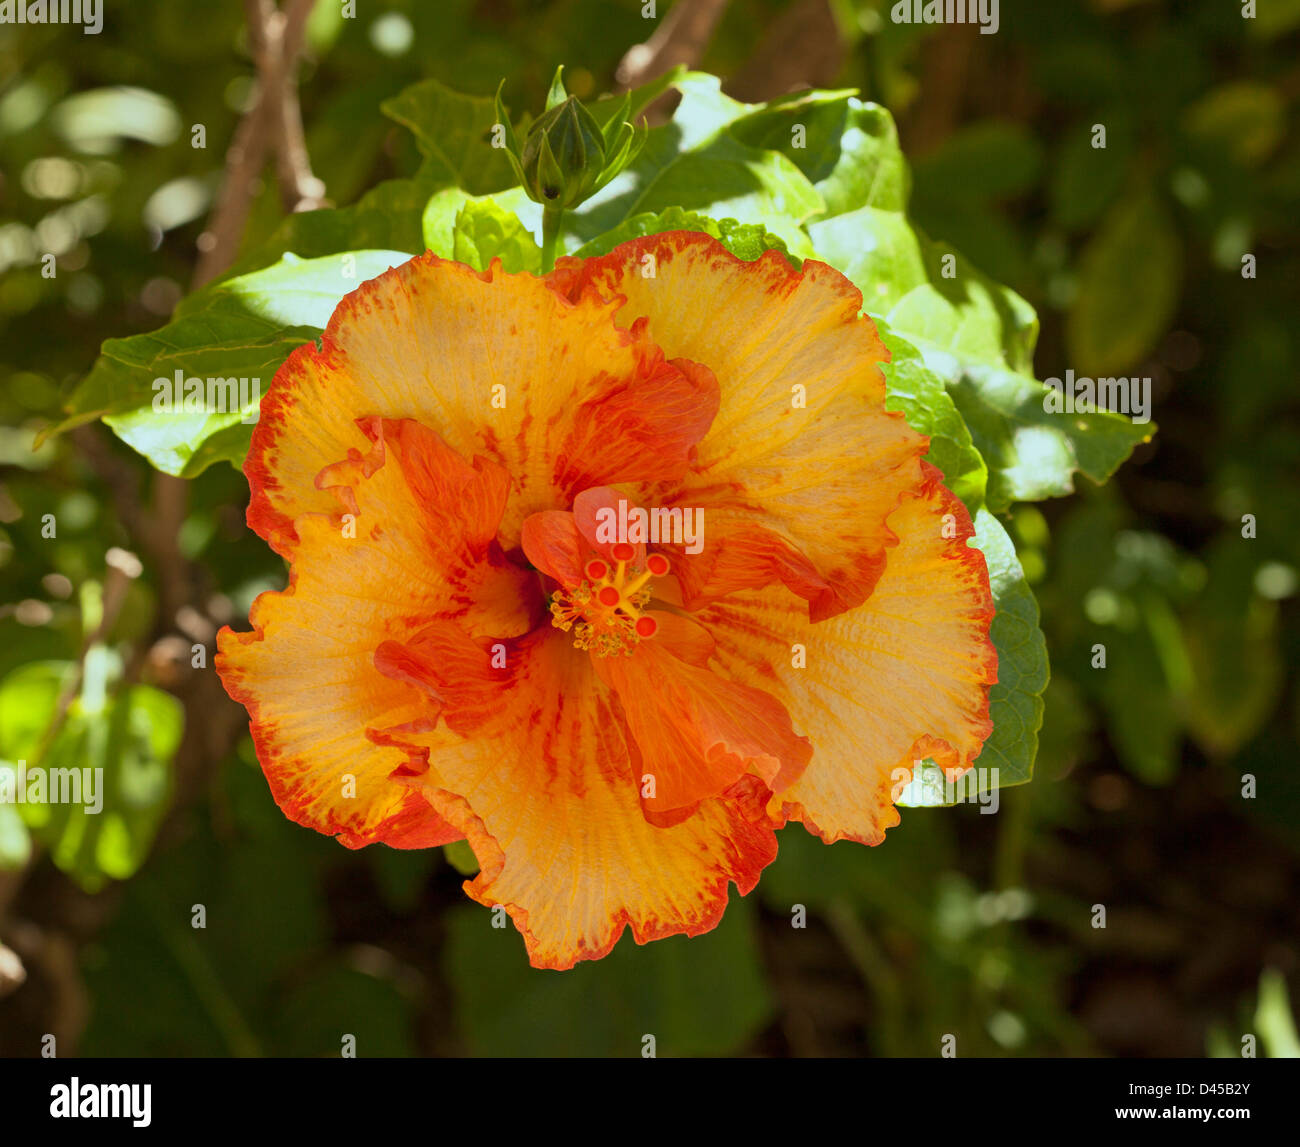 Spectacular brightly colored red and orange flower of Hibiscus cultivar 'Rainbow Fire' against background of green foliage Stock Photo